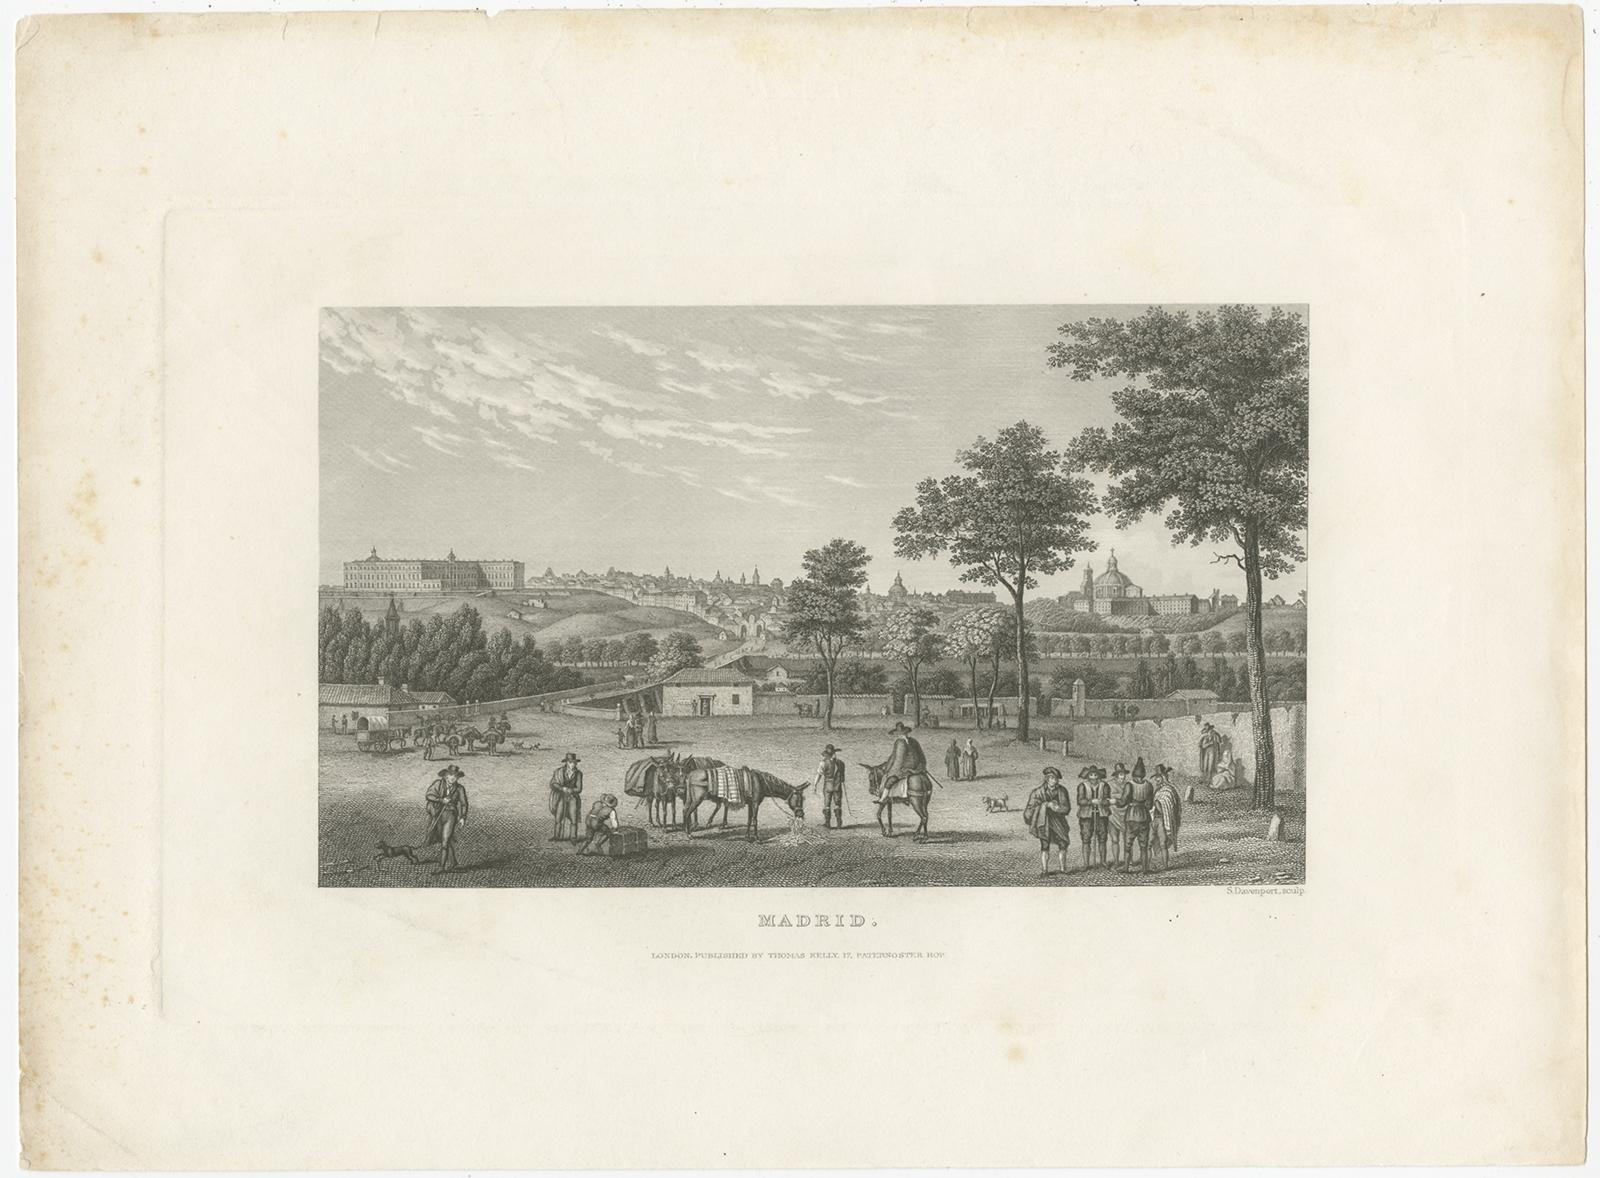 Description: Antique print titled 'Madrid'. 

View of the city of Madrid, Spain. Source unknown, to be determined.

Artists and Engravers: Engraved by S. Davenport. Published by T. Kelly.

Condition: Good, general age-related toning. Minor